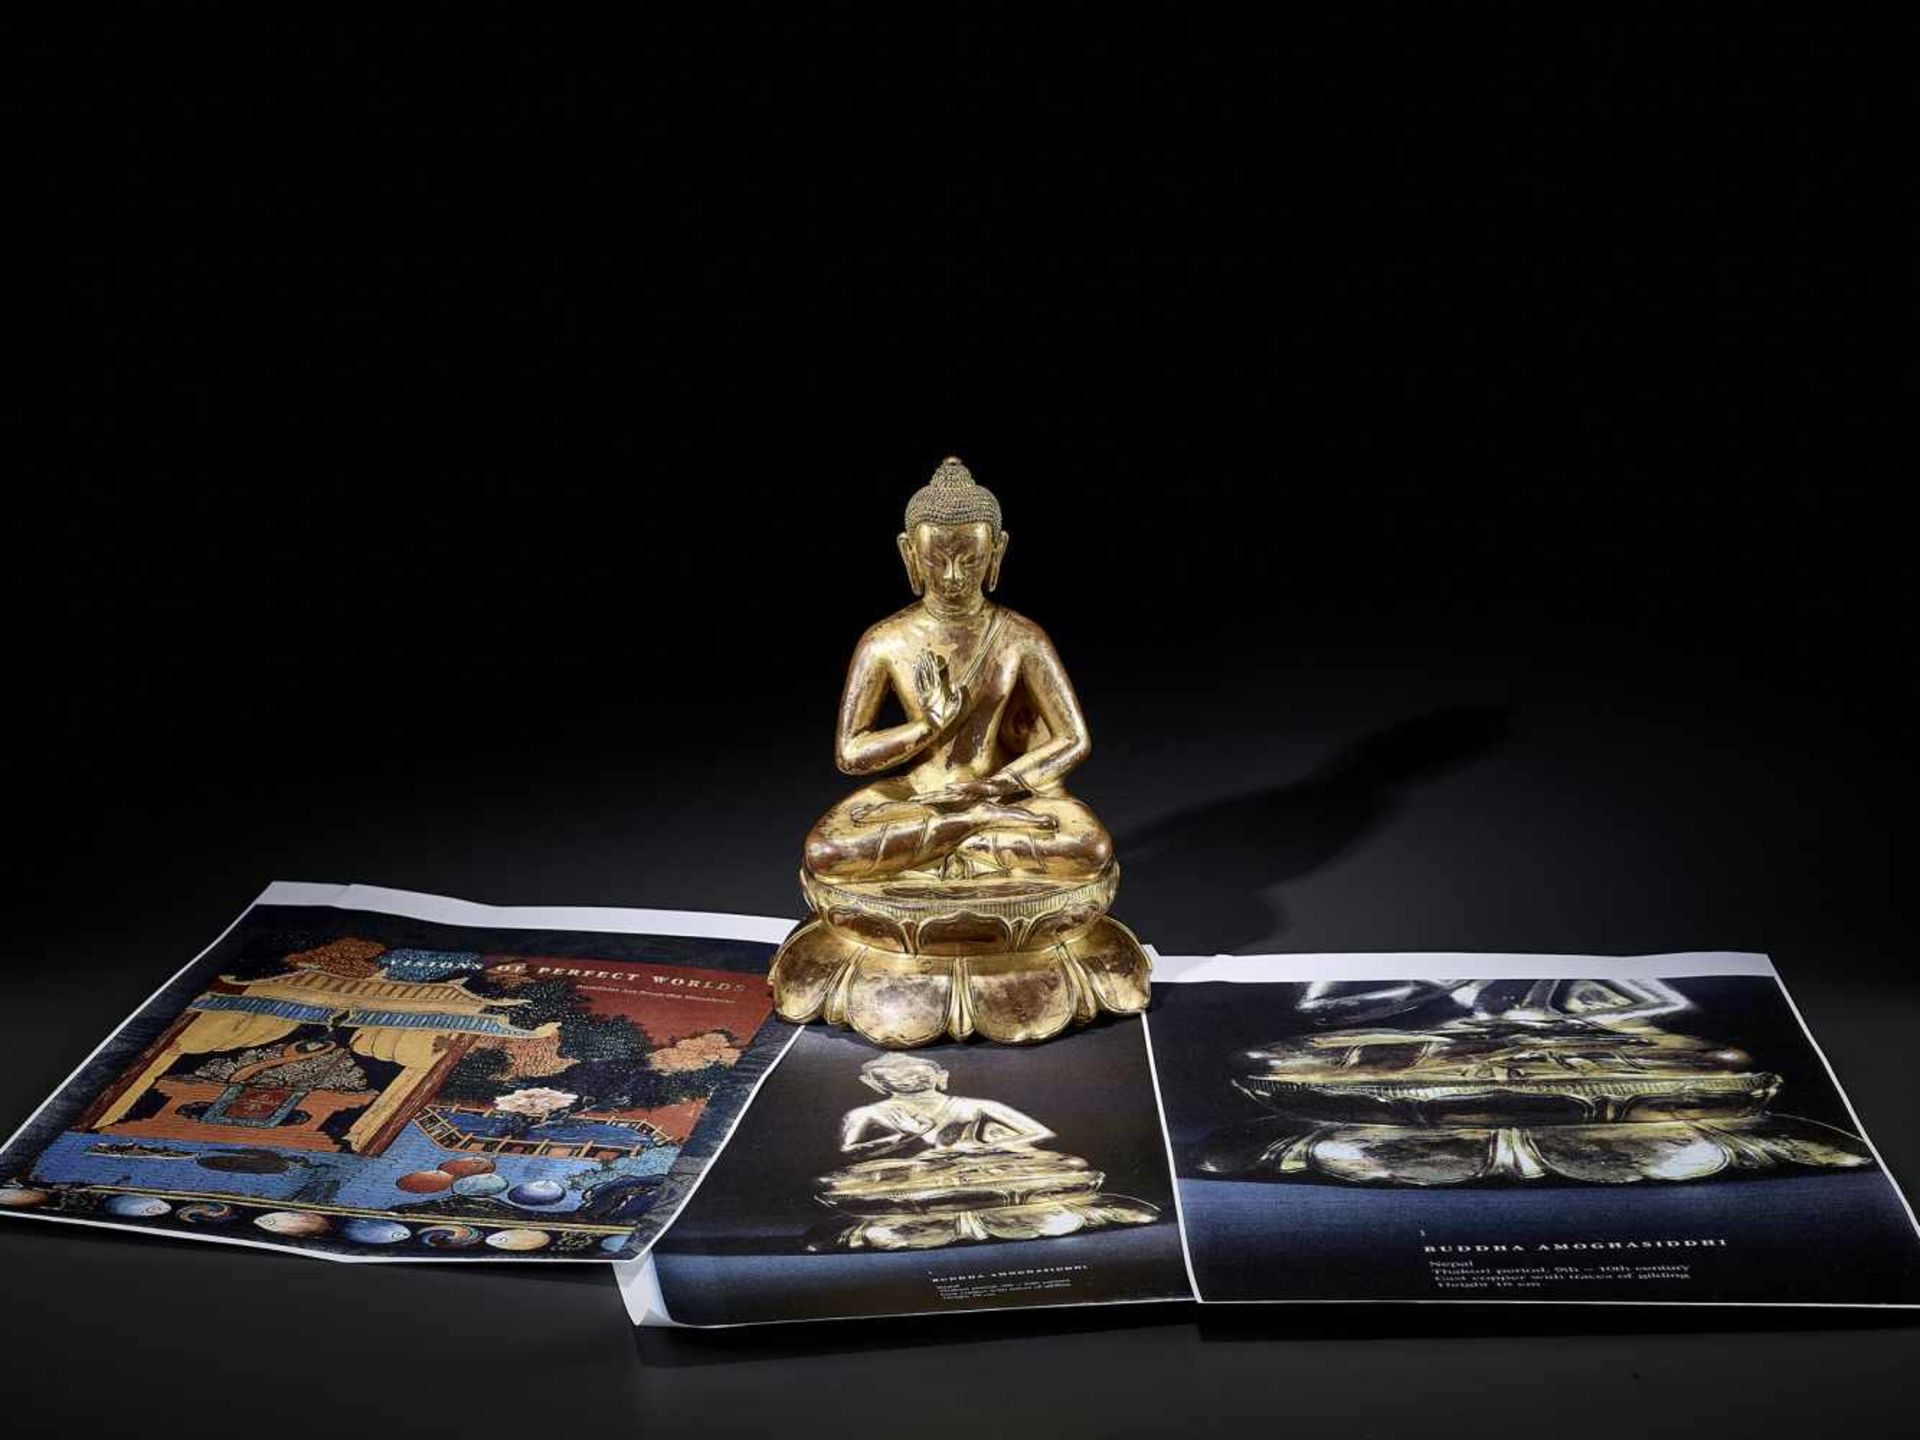 A BUDDHA AMOGHASIDDHI, NEPAL 17TH CENTURY The heavily cast gilt copper-alloy figure is seated in - Image 11 of 14